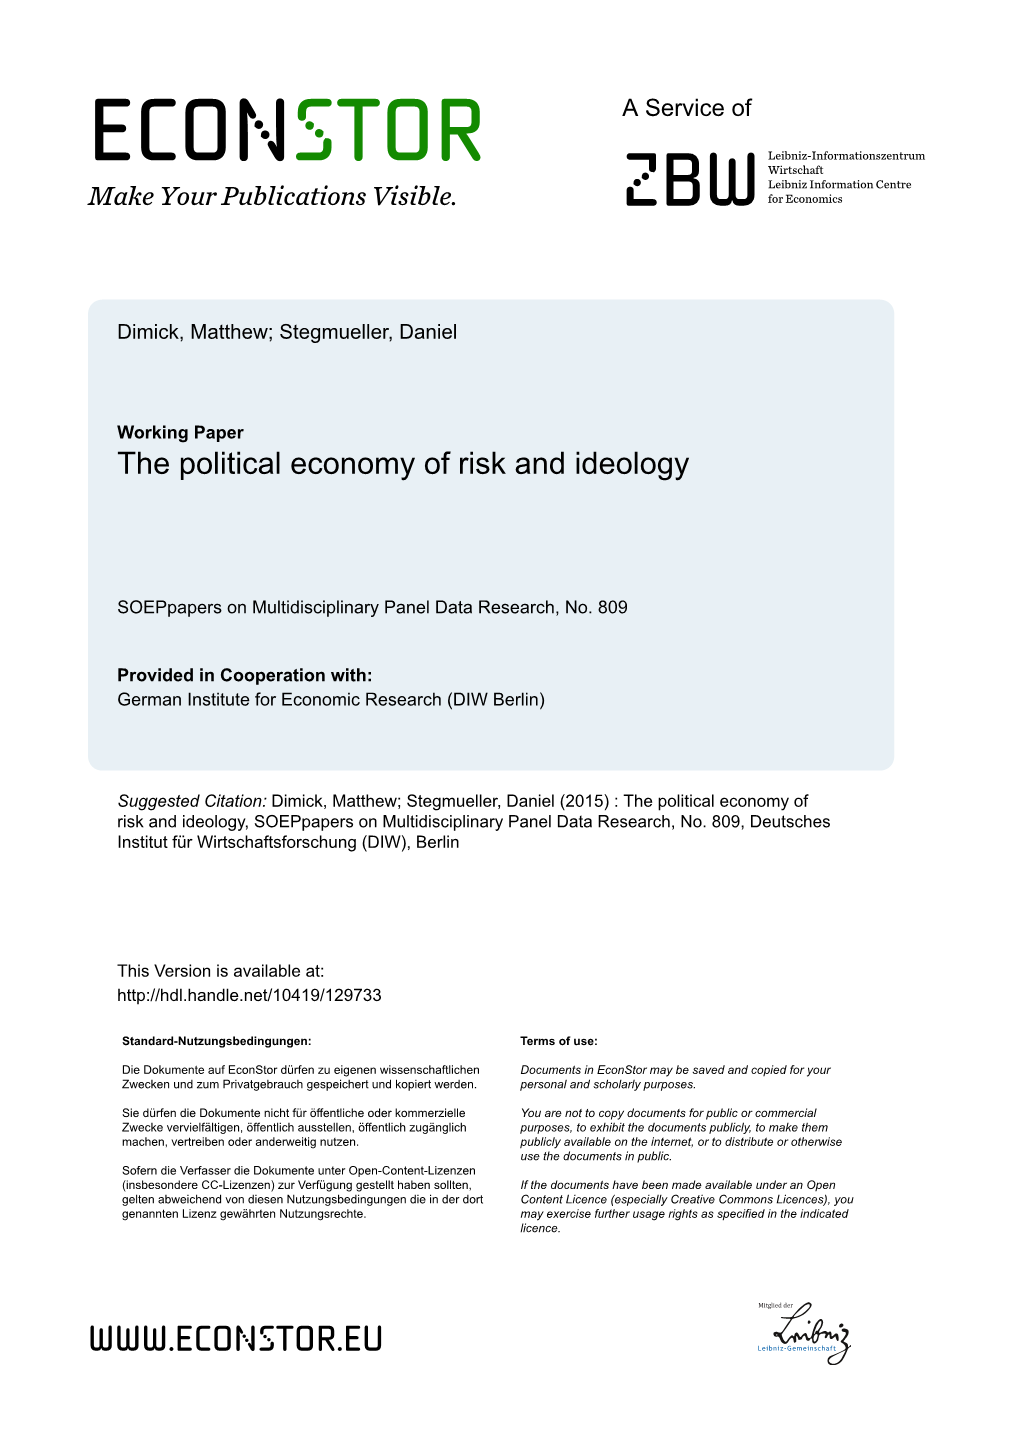 The Political Economy of Risk and Ideology